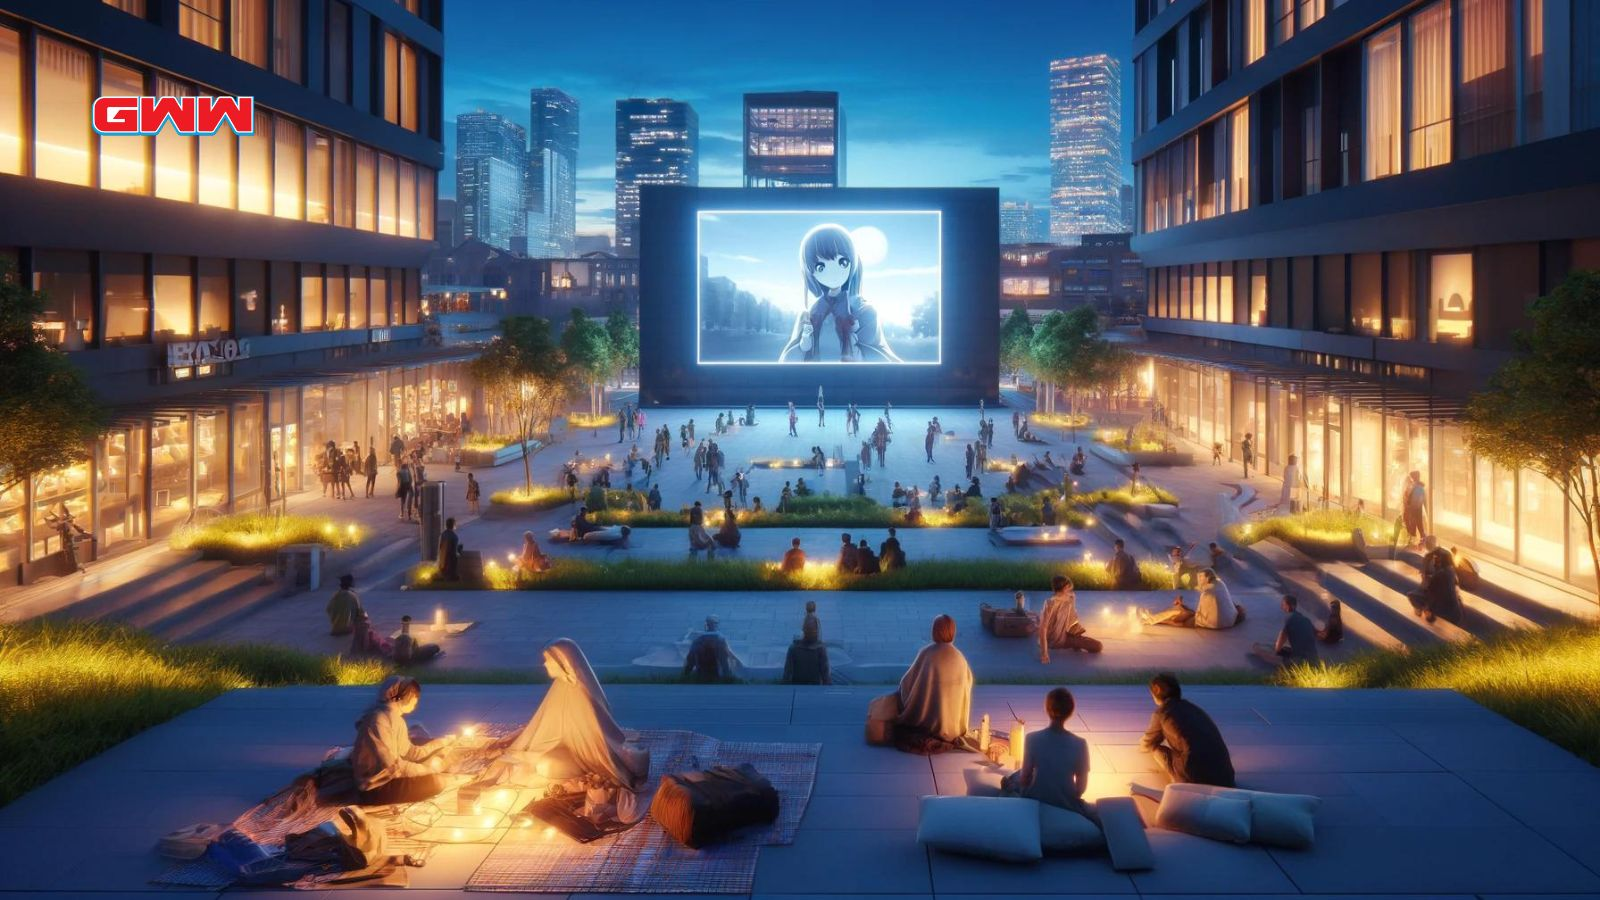 Public plaza with anime projection, free anime viewing spot